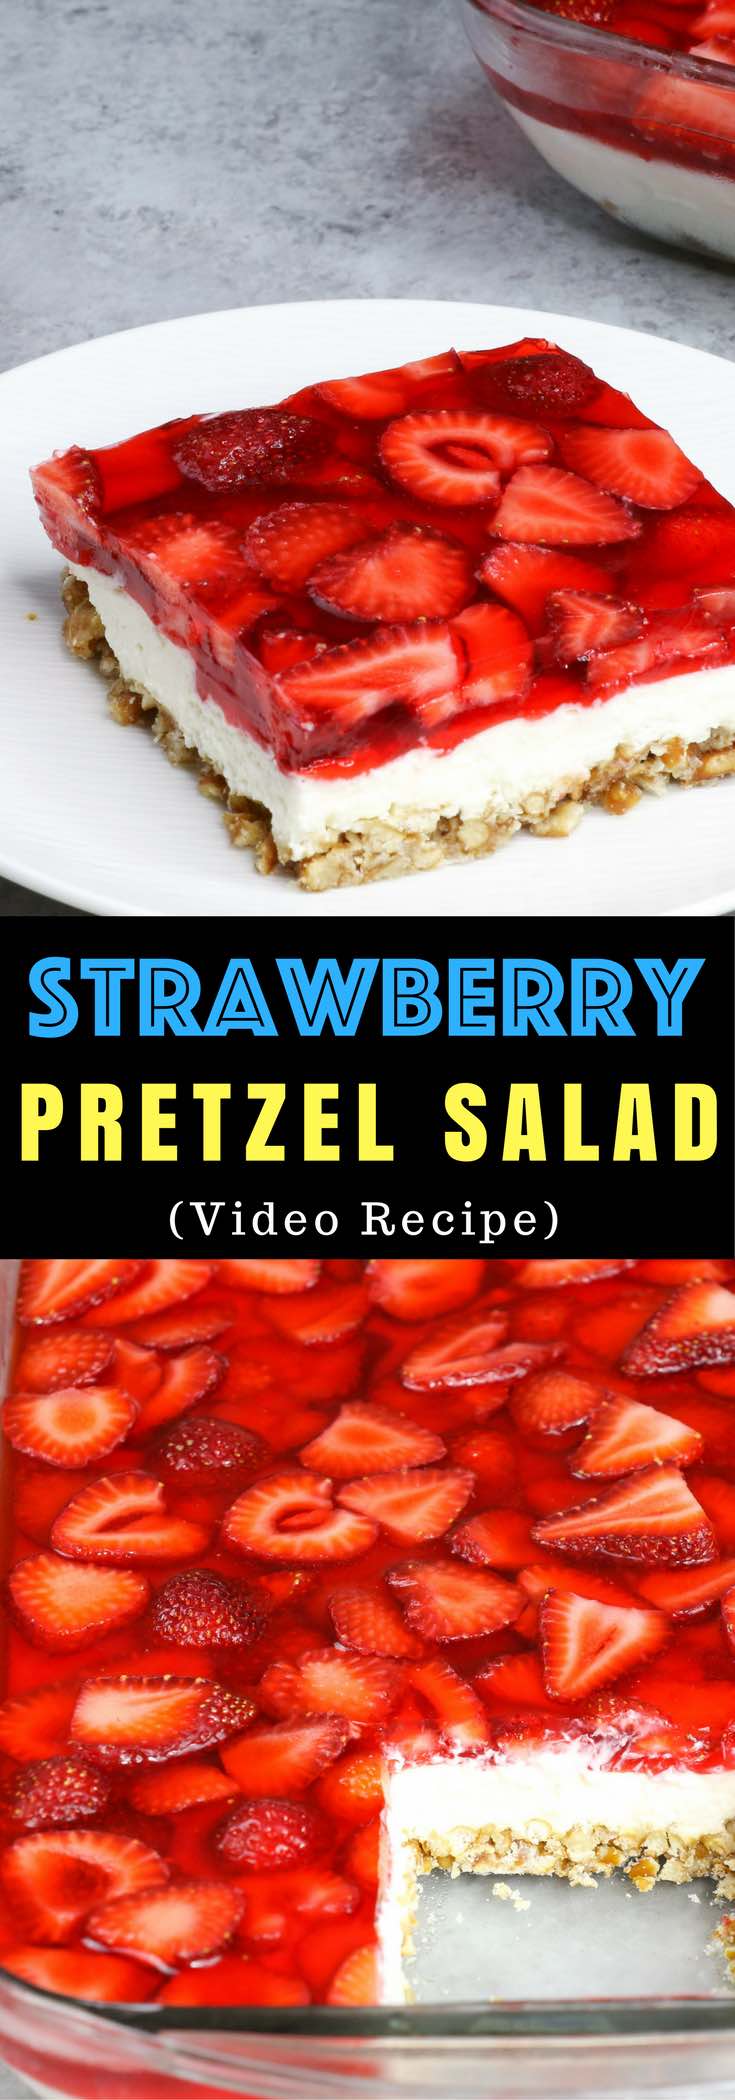 Strawberry Pretzel Salad – A guaranteed hit at any parties! In one bite, you will get the saltiness from its pretzel crust, sweetness from the creamy and smooth cream cheese, and the fresh flavor from the strawberry and jello top layer! So irresistible! Great for holiday and birthday parties. Easy recipe, party desserts. Vegetarian. Video recipe. | Tipbuzz.com